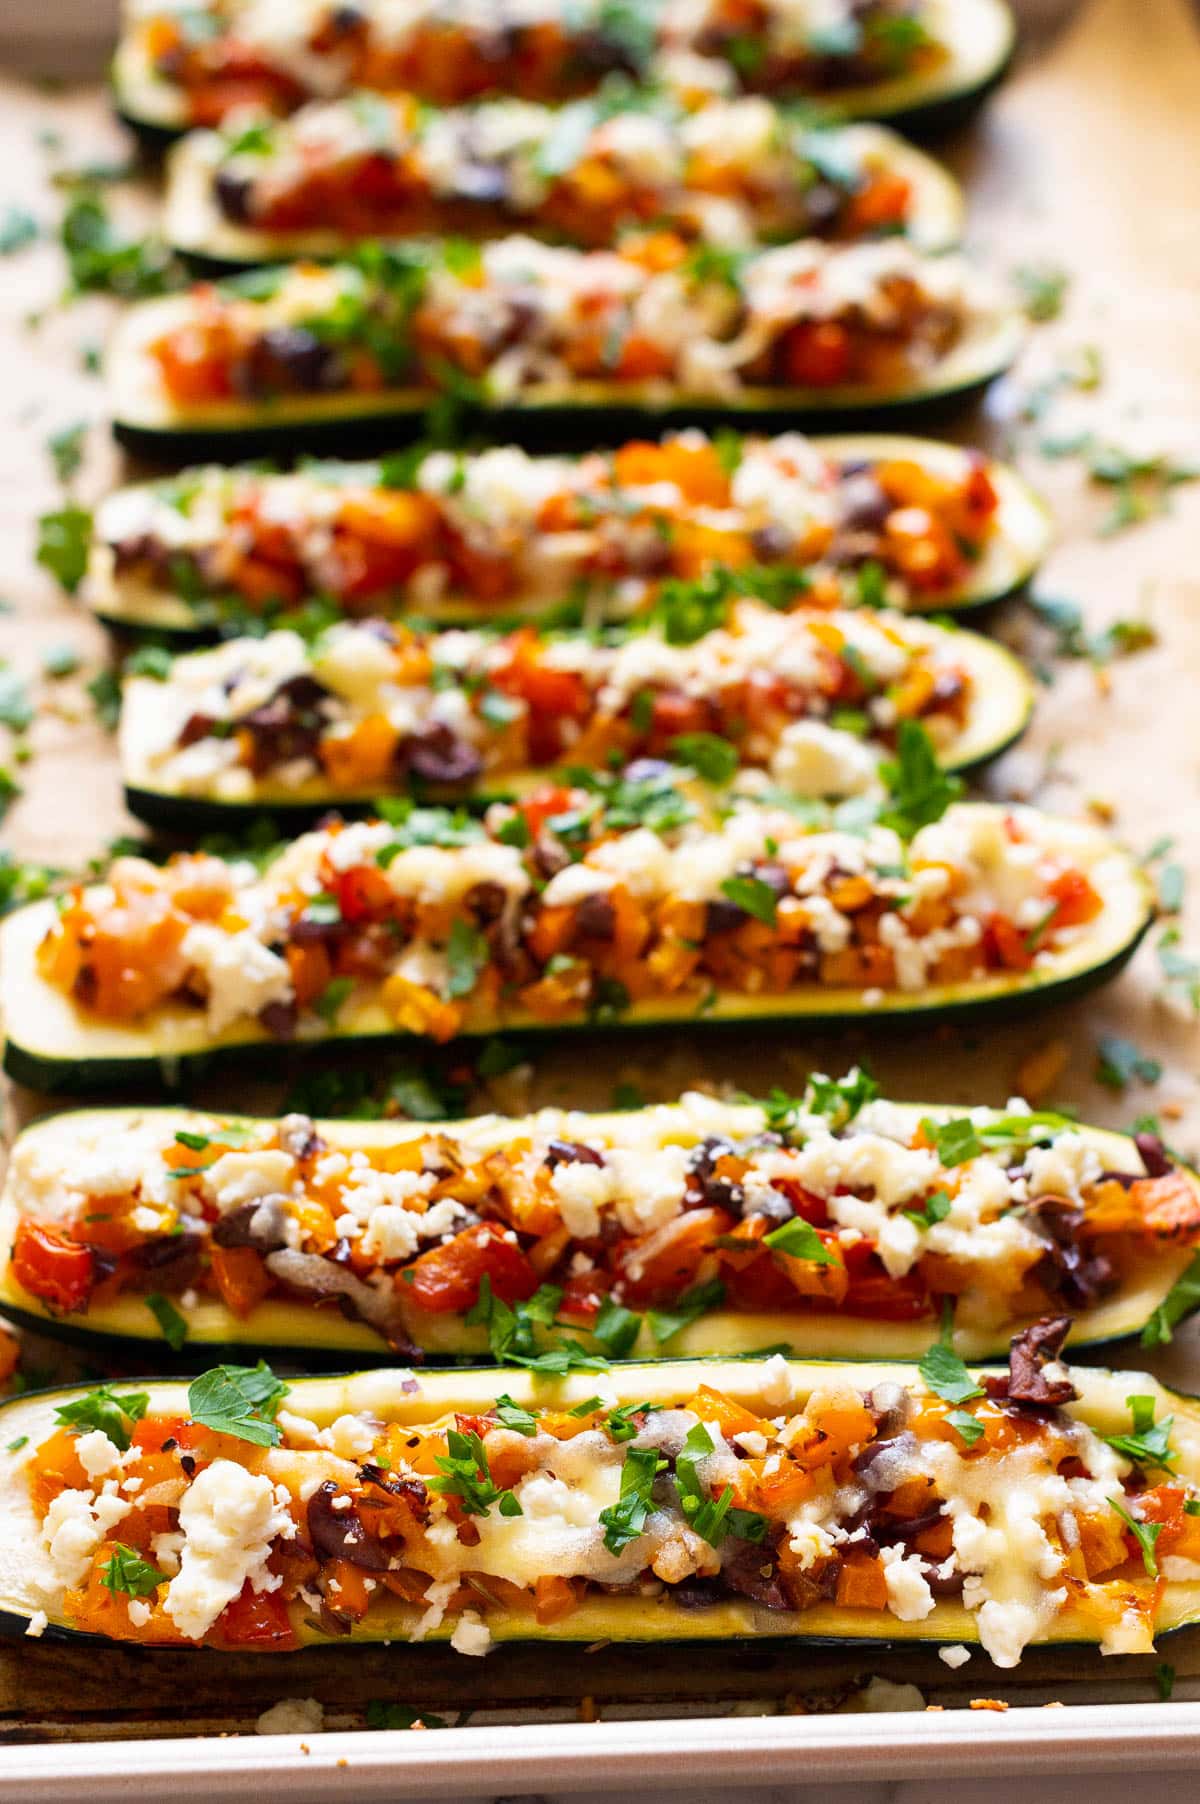 Side view of stuffed zucchini boats with Mediterranean filling.